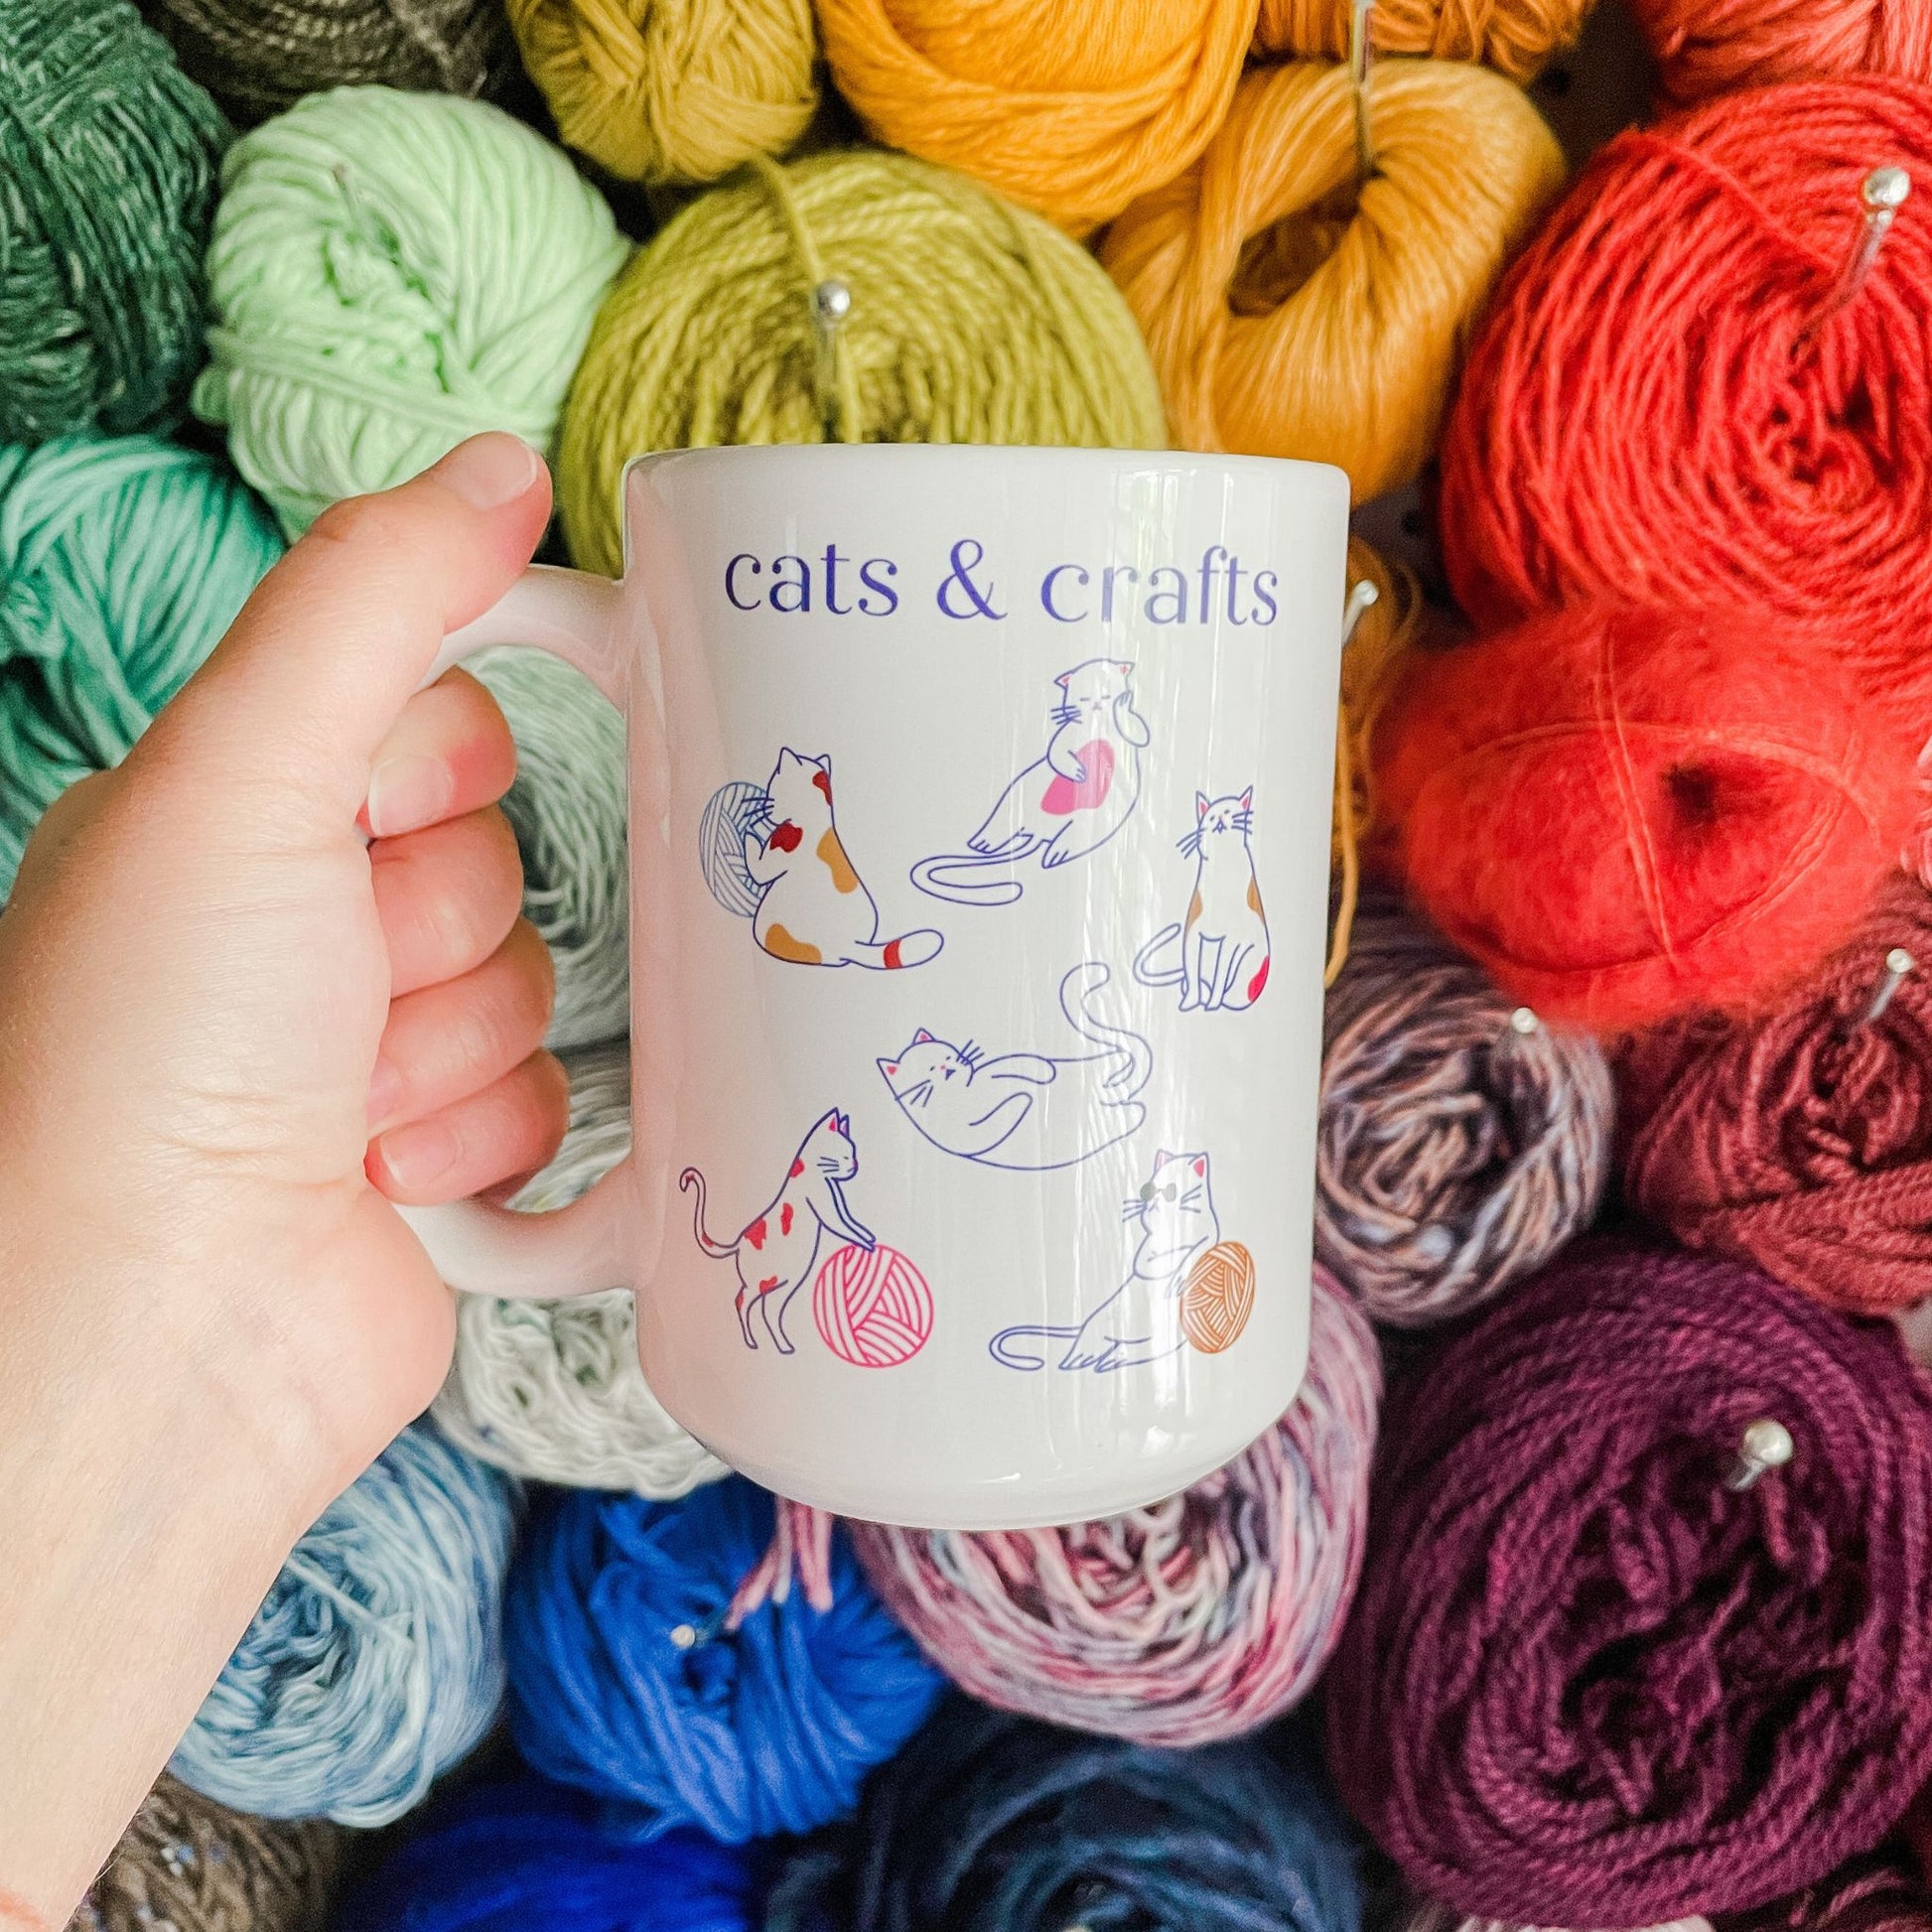 cats and crafts mug - wear and woven